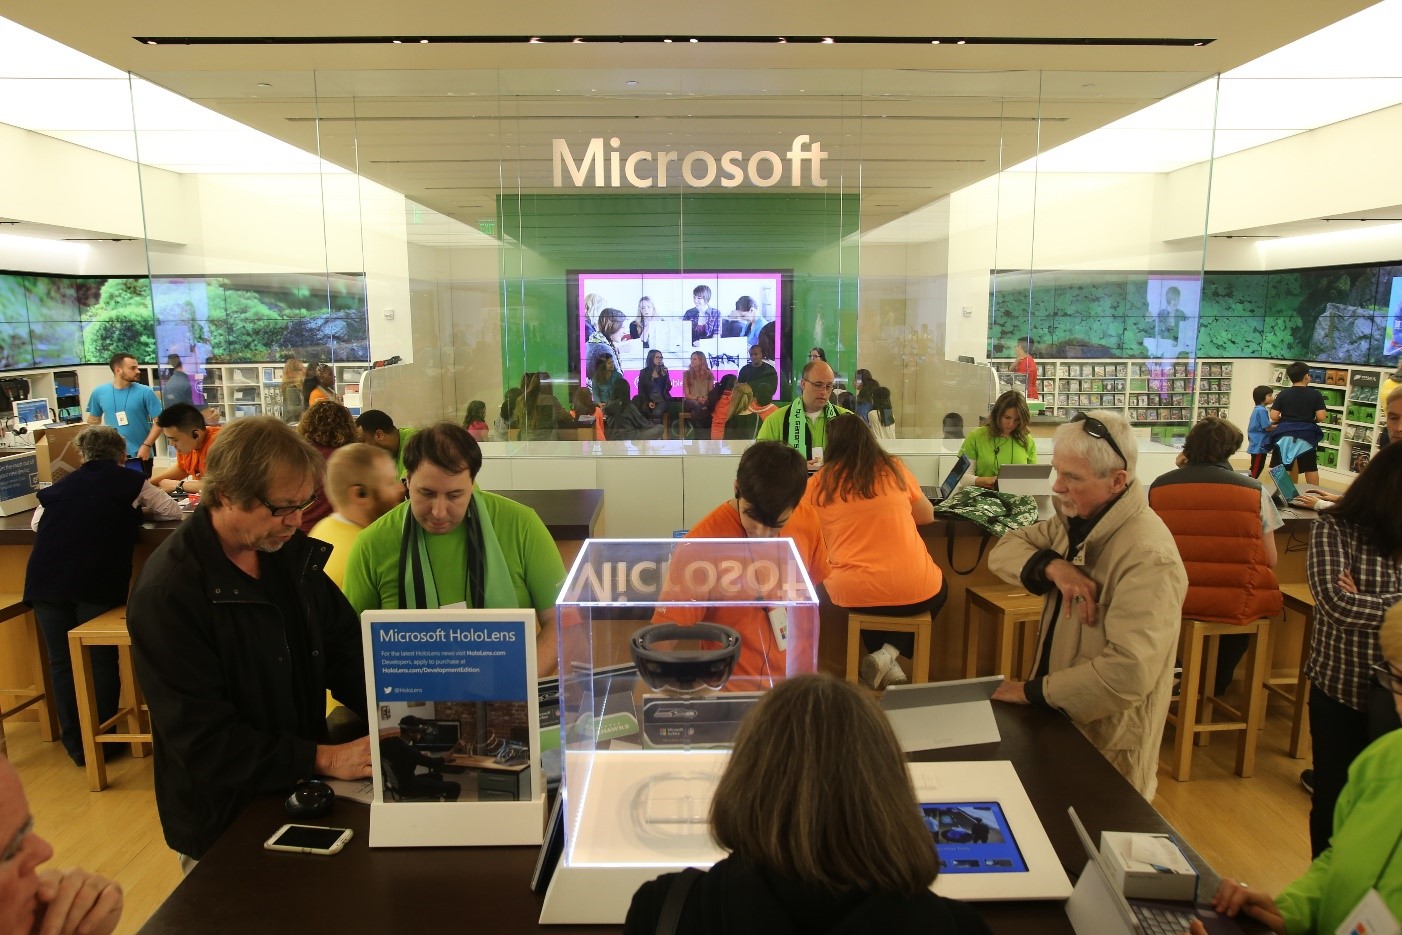 Customers shopping at the Microsoft Store